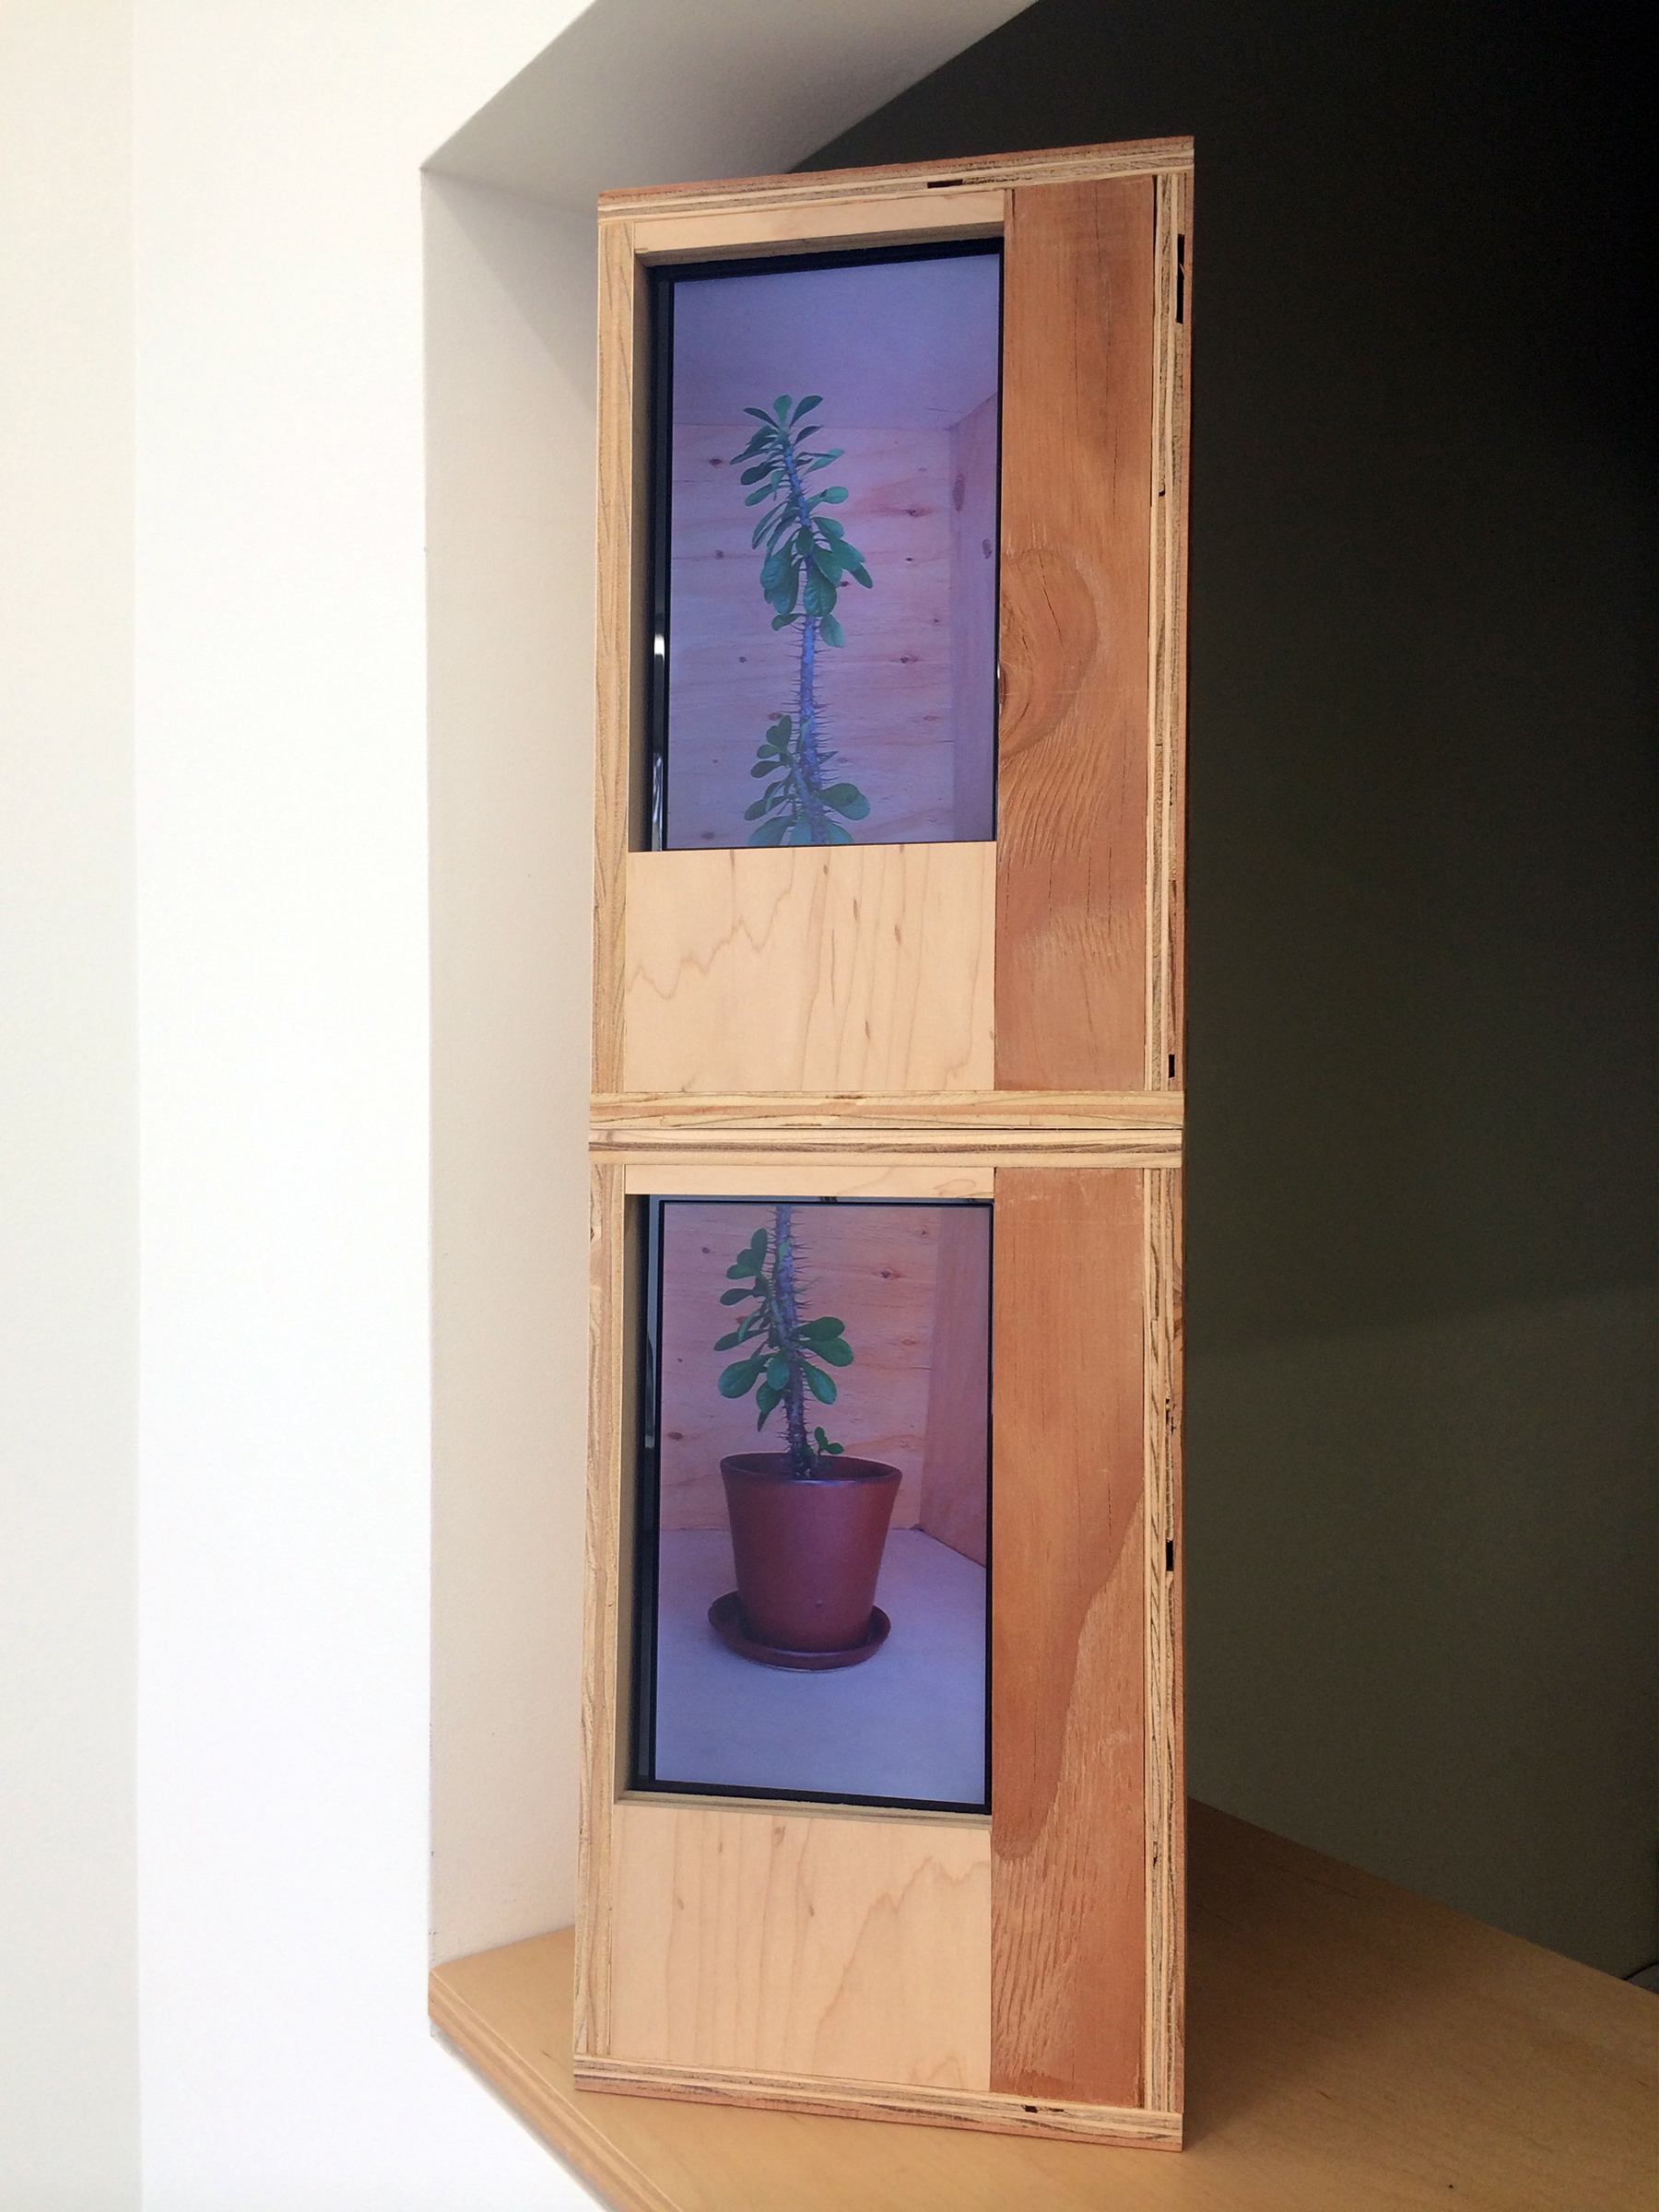   JOSHUA PIEPER   Video Cactus , 2014, LCD monitors, dvds and wood housing, 25.5" x 6.25" x 7.75" 